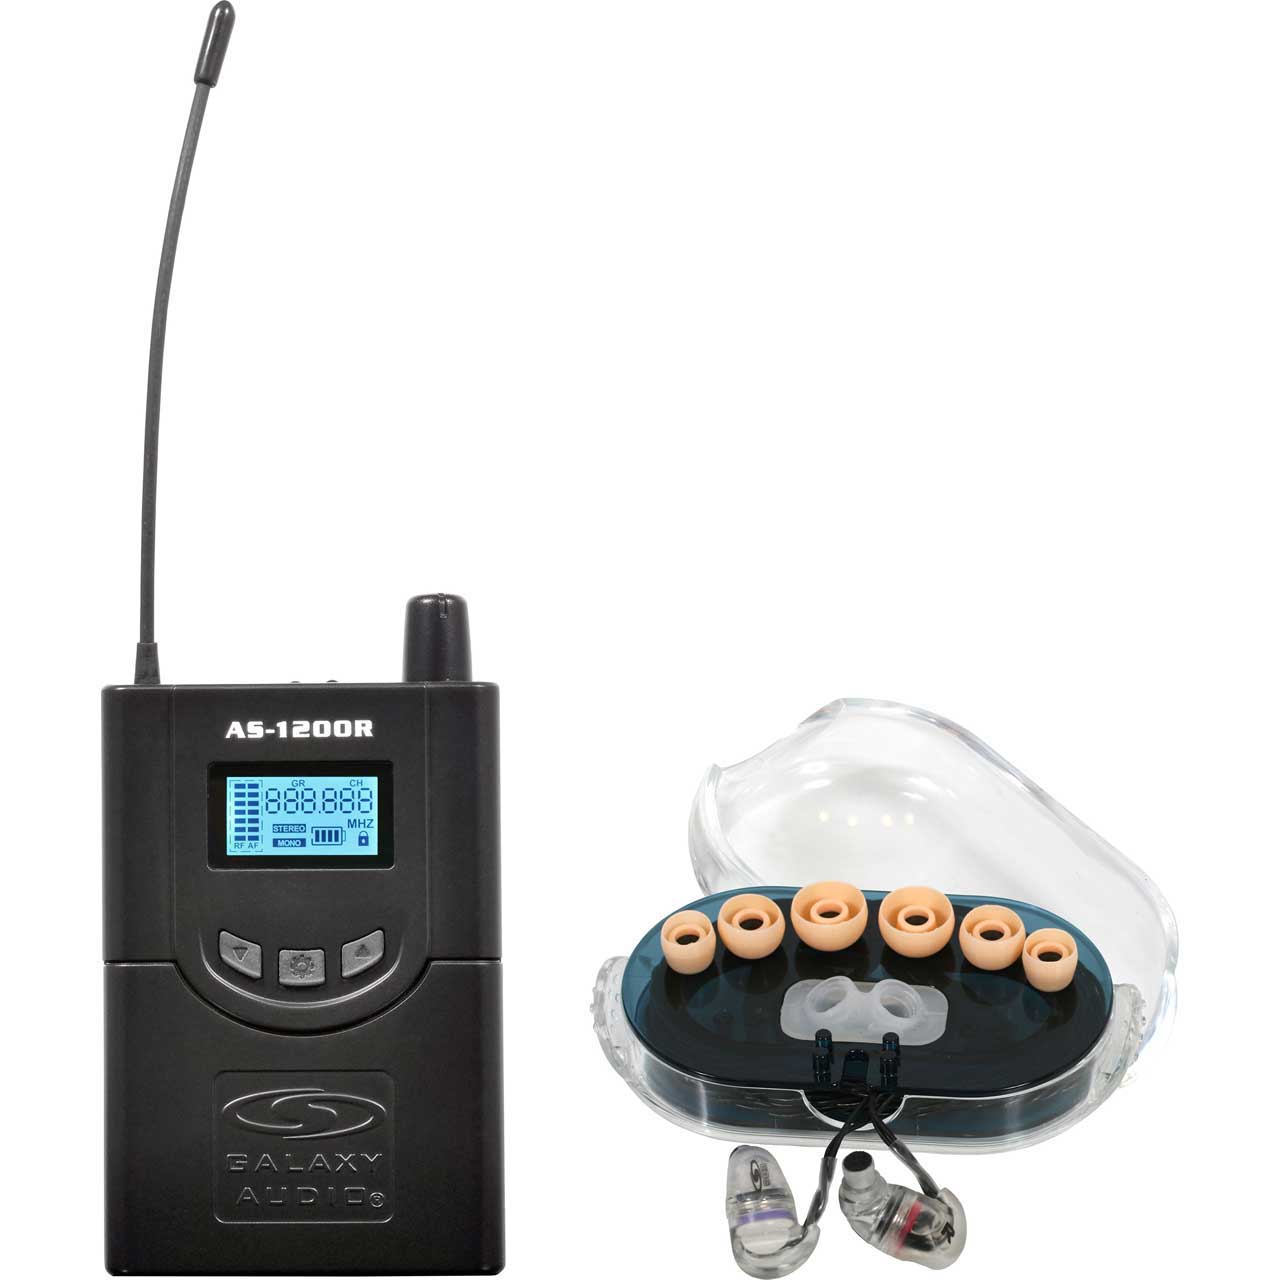 Galaxy Audio AS-1206RN 210 Channel Stereo Wireless Personal In-Ear Monitor Receiver with EB6 Earbuds - 518-542 MHz AS-1206RN